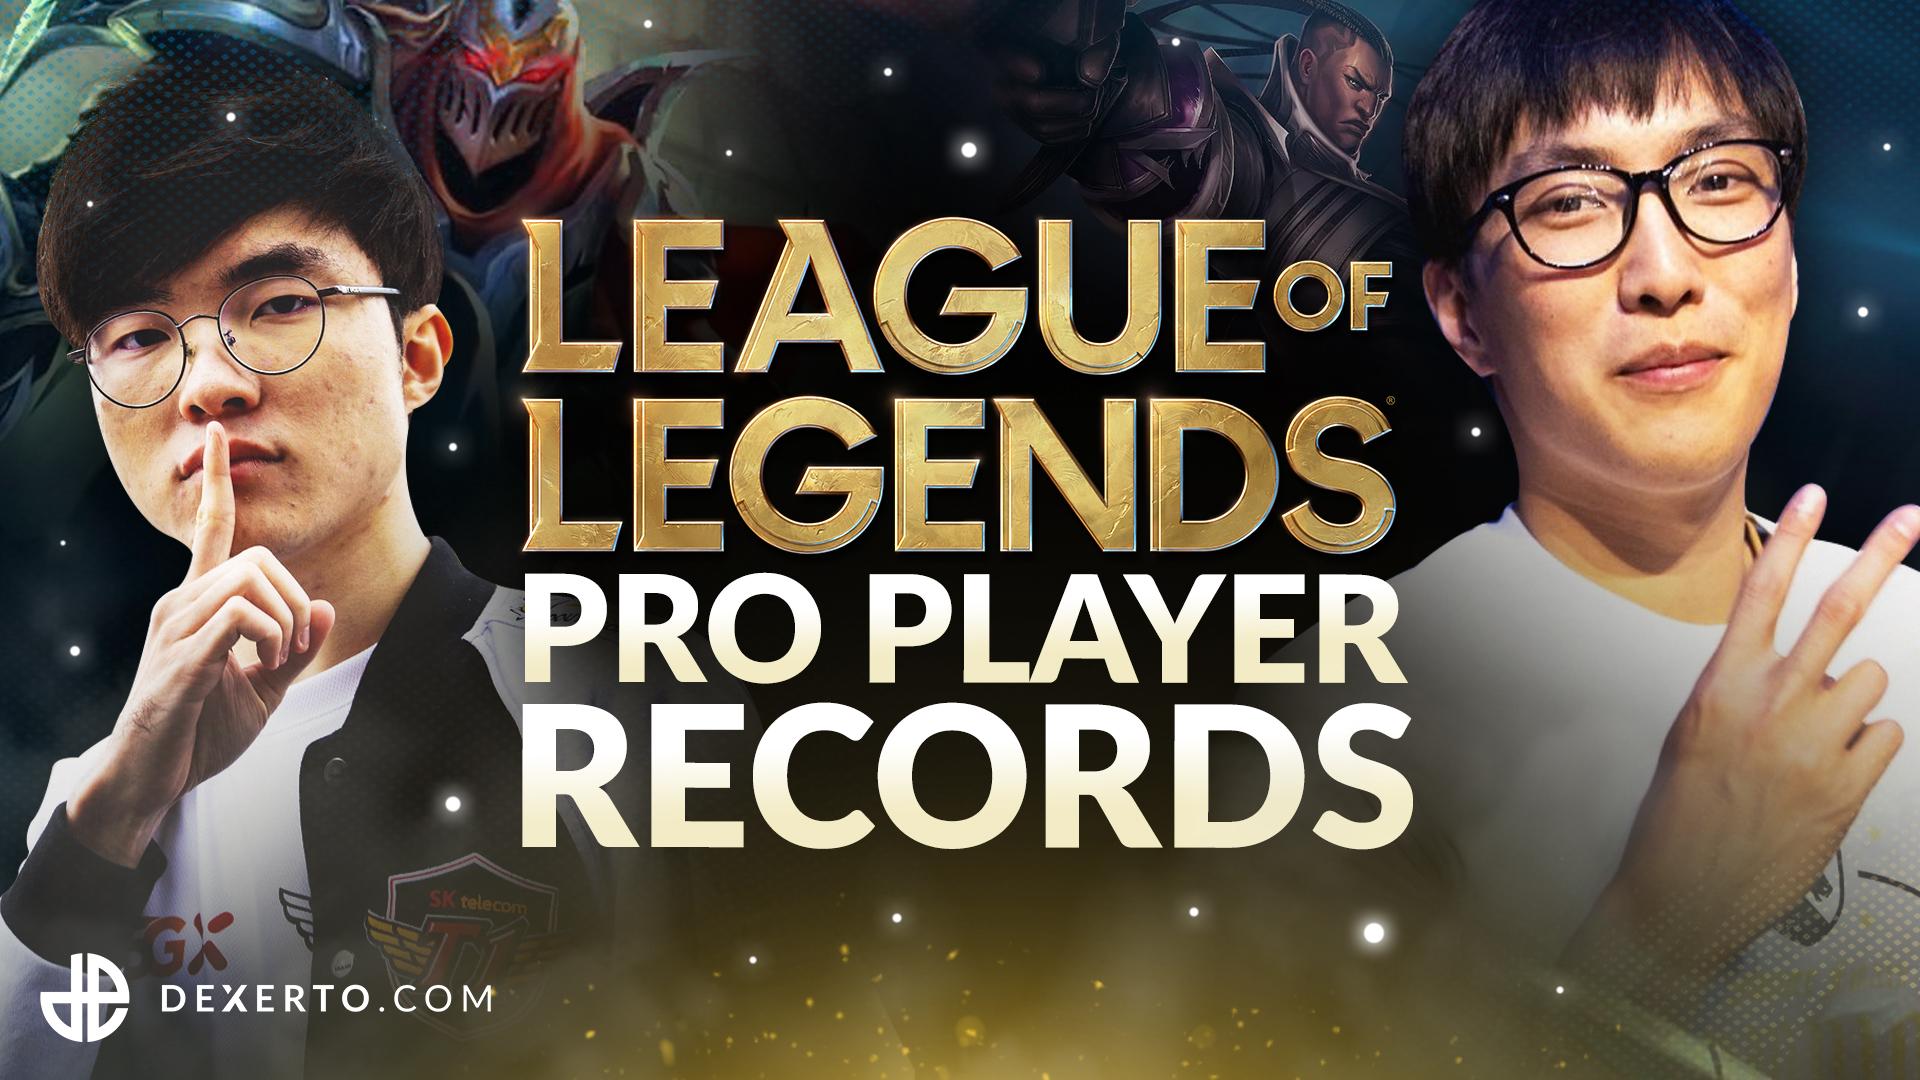 Hard truths every League of Legends player needs to hear to rank up